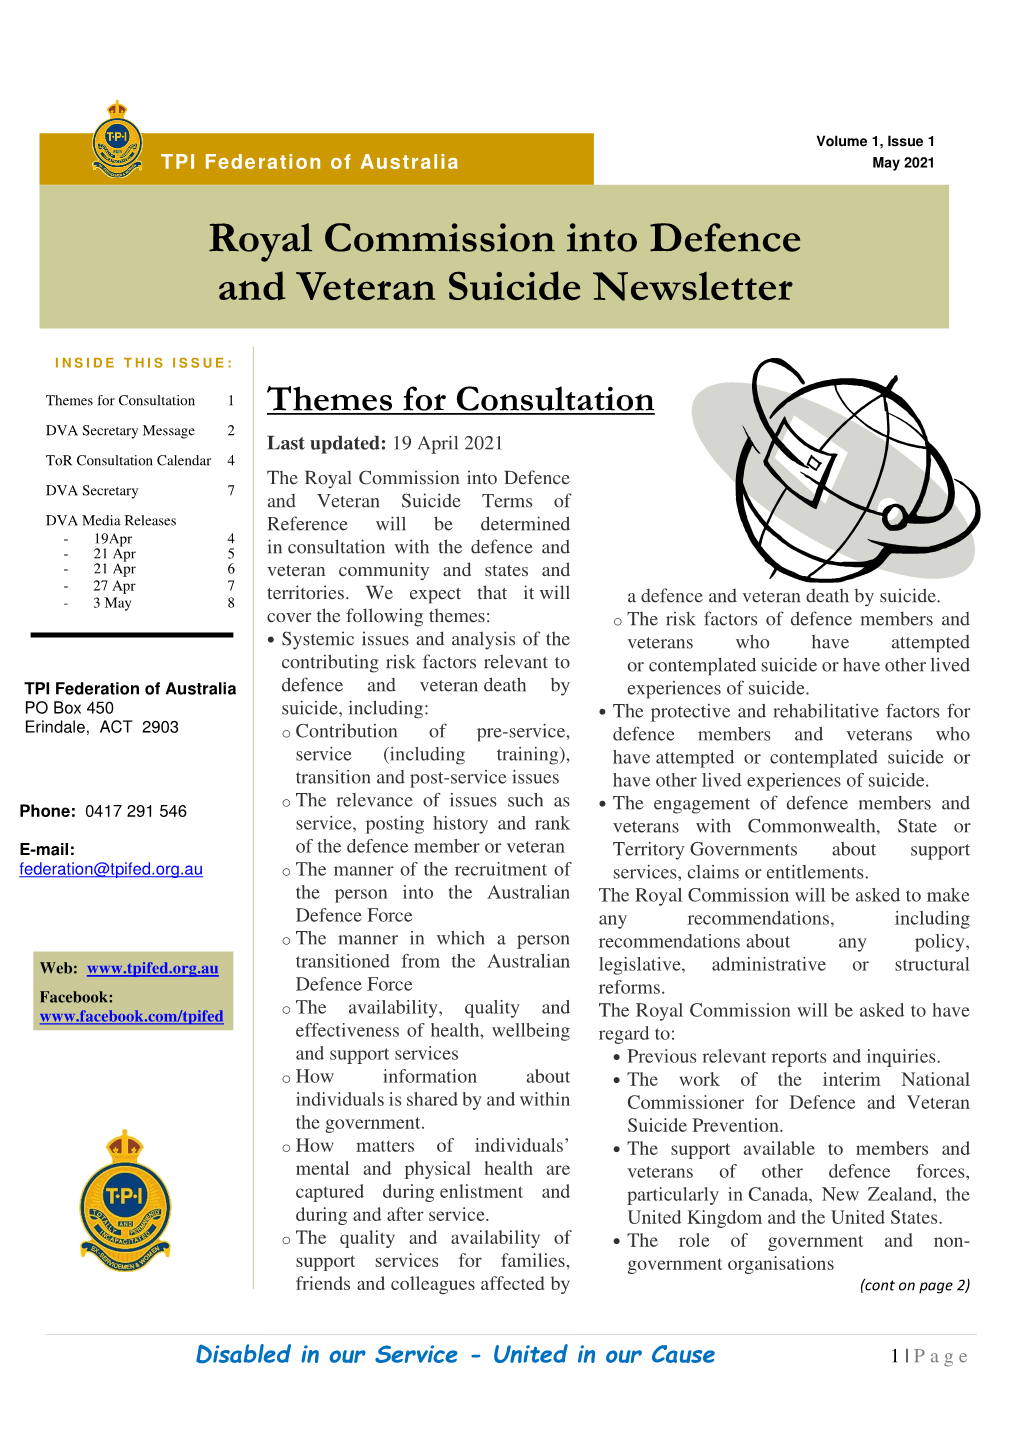 Royal Commission Into Defence and Veteran Suicide Newsletter